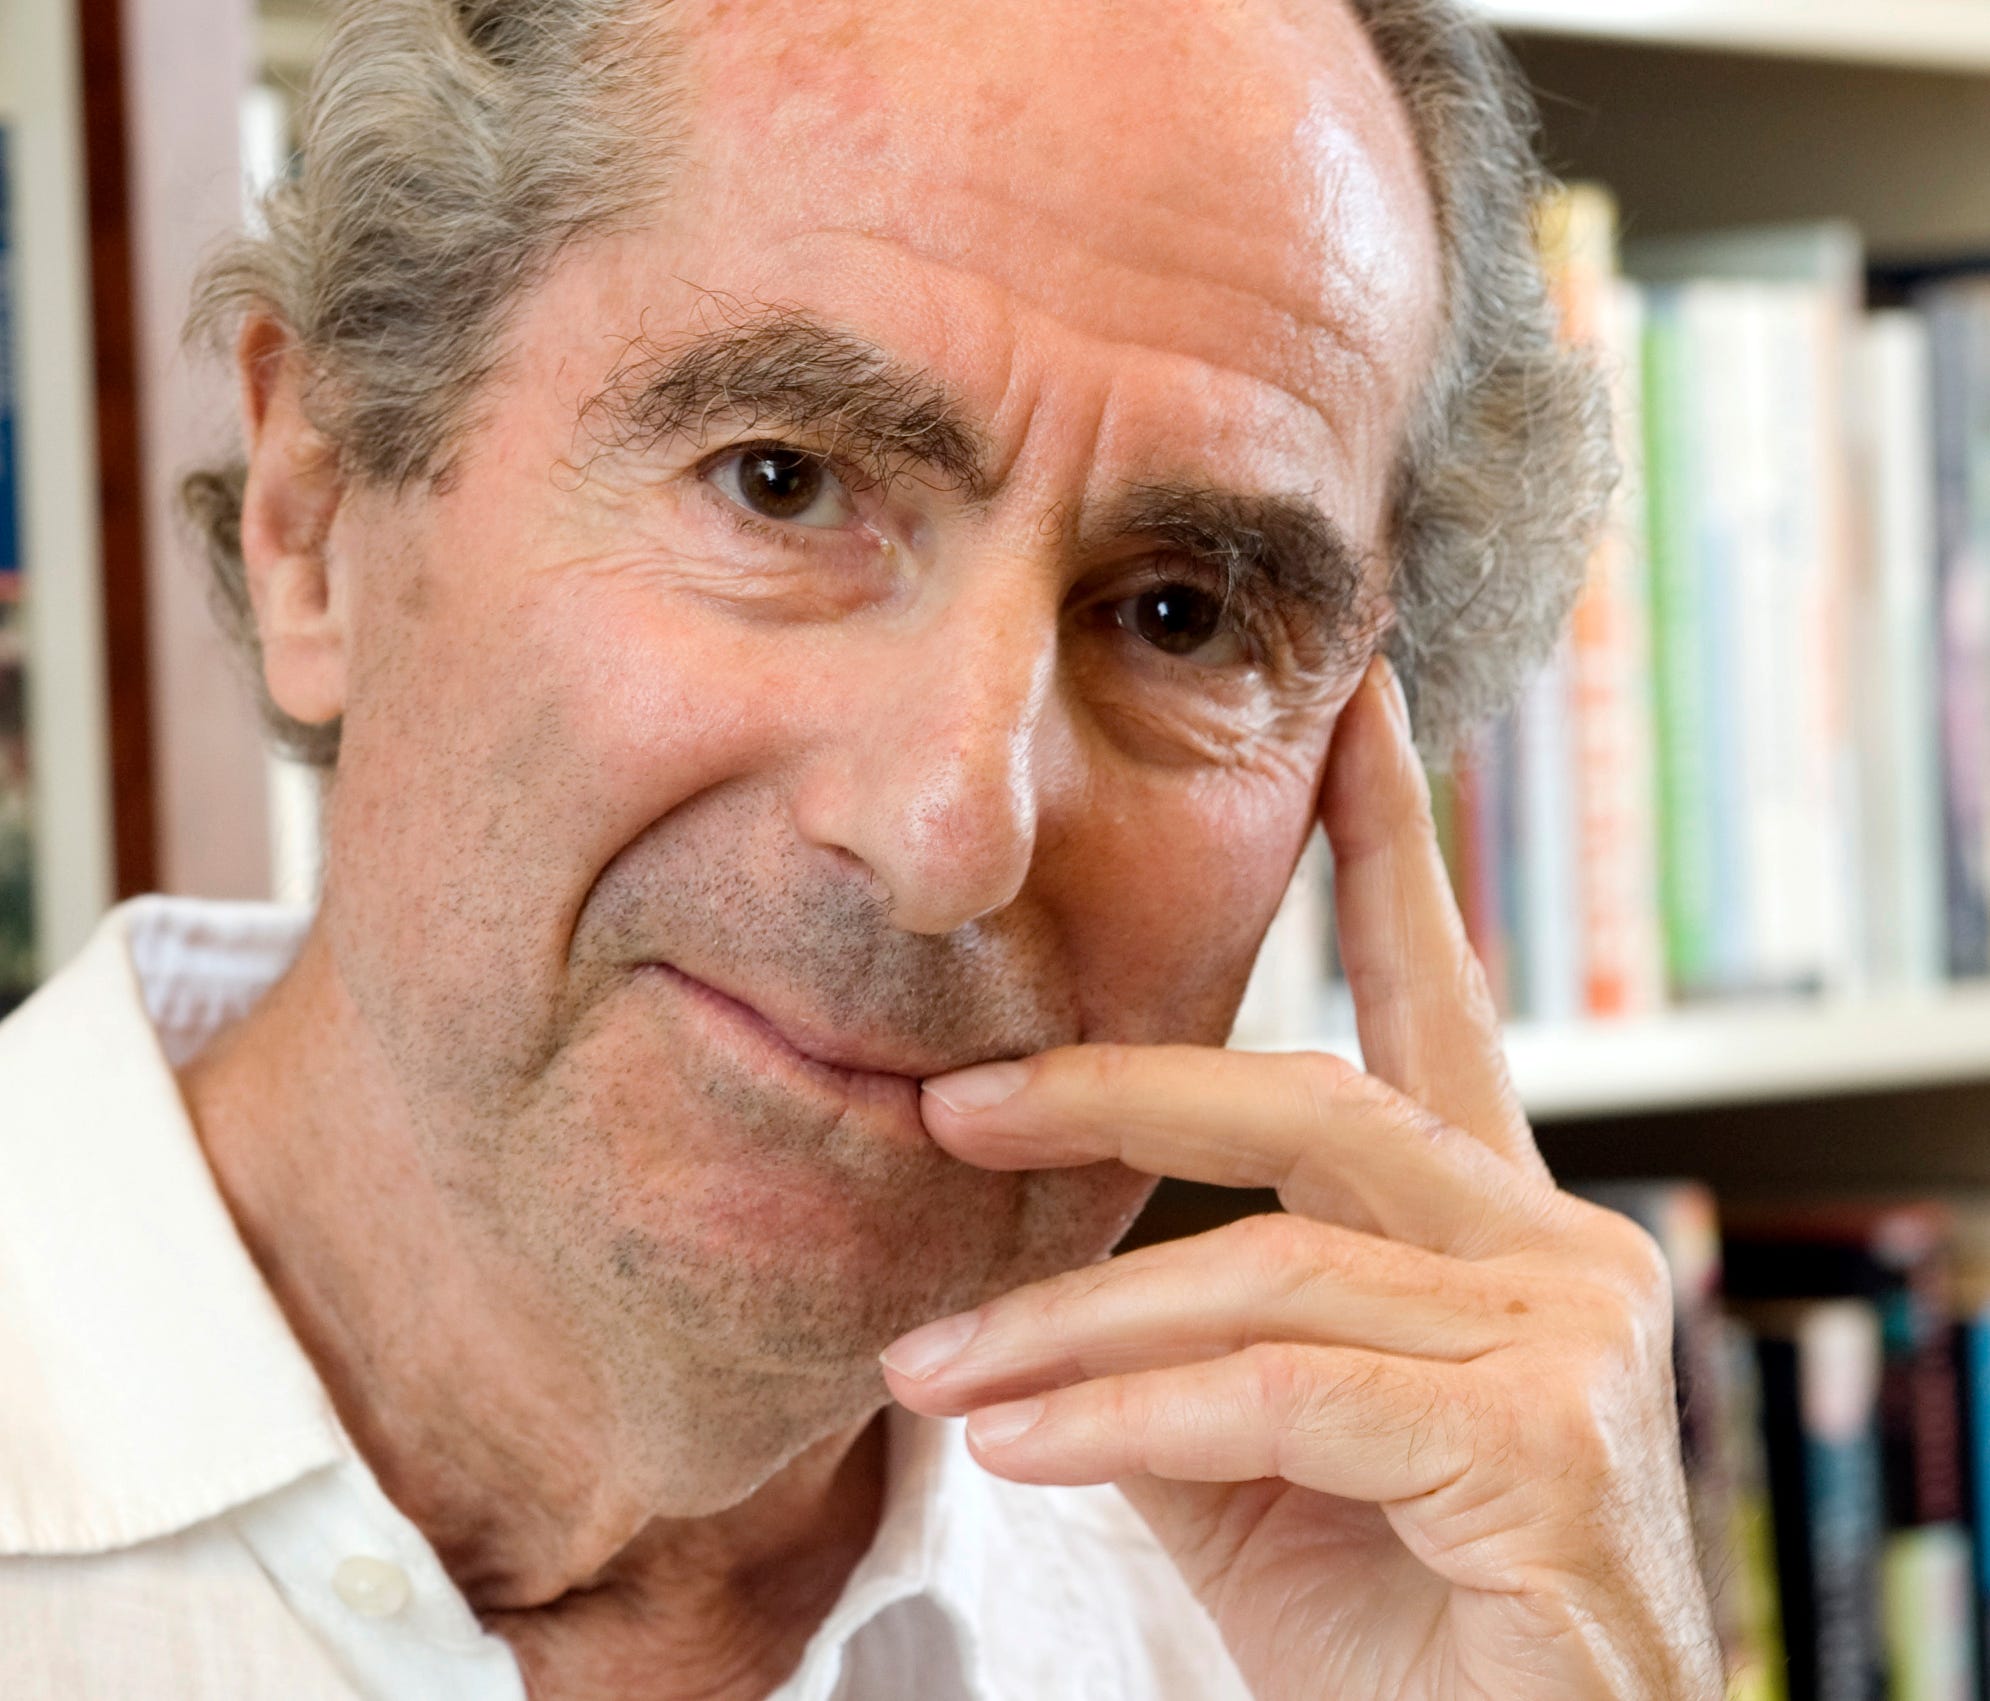 Philip Roth poses for a photo in the offices of his publisher Houghton Mifflin, in New York.